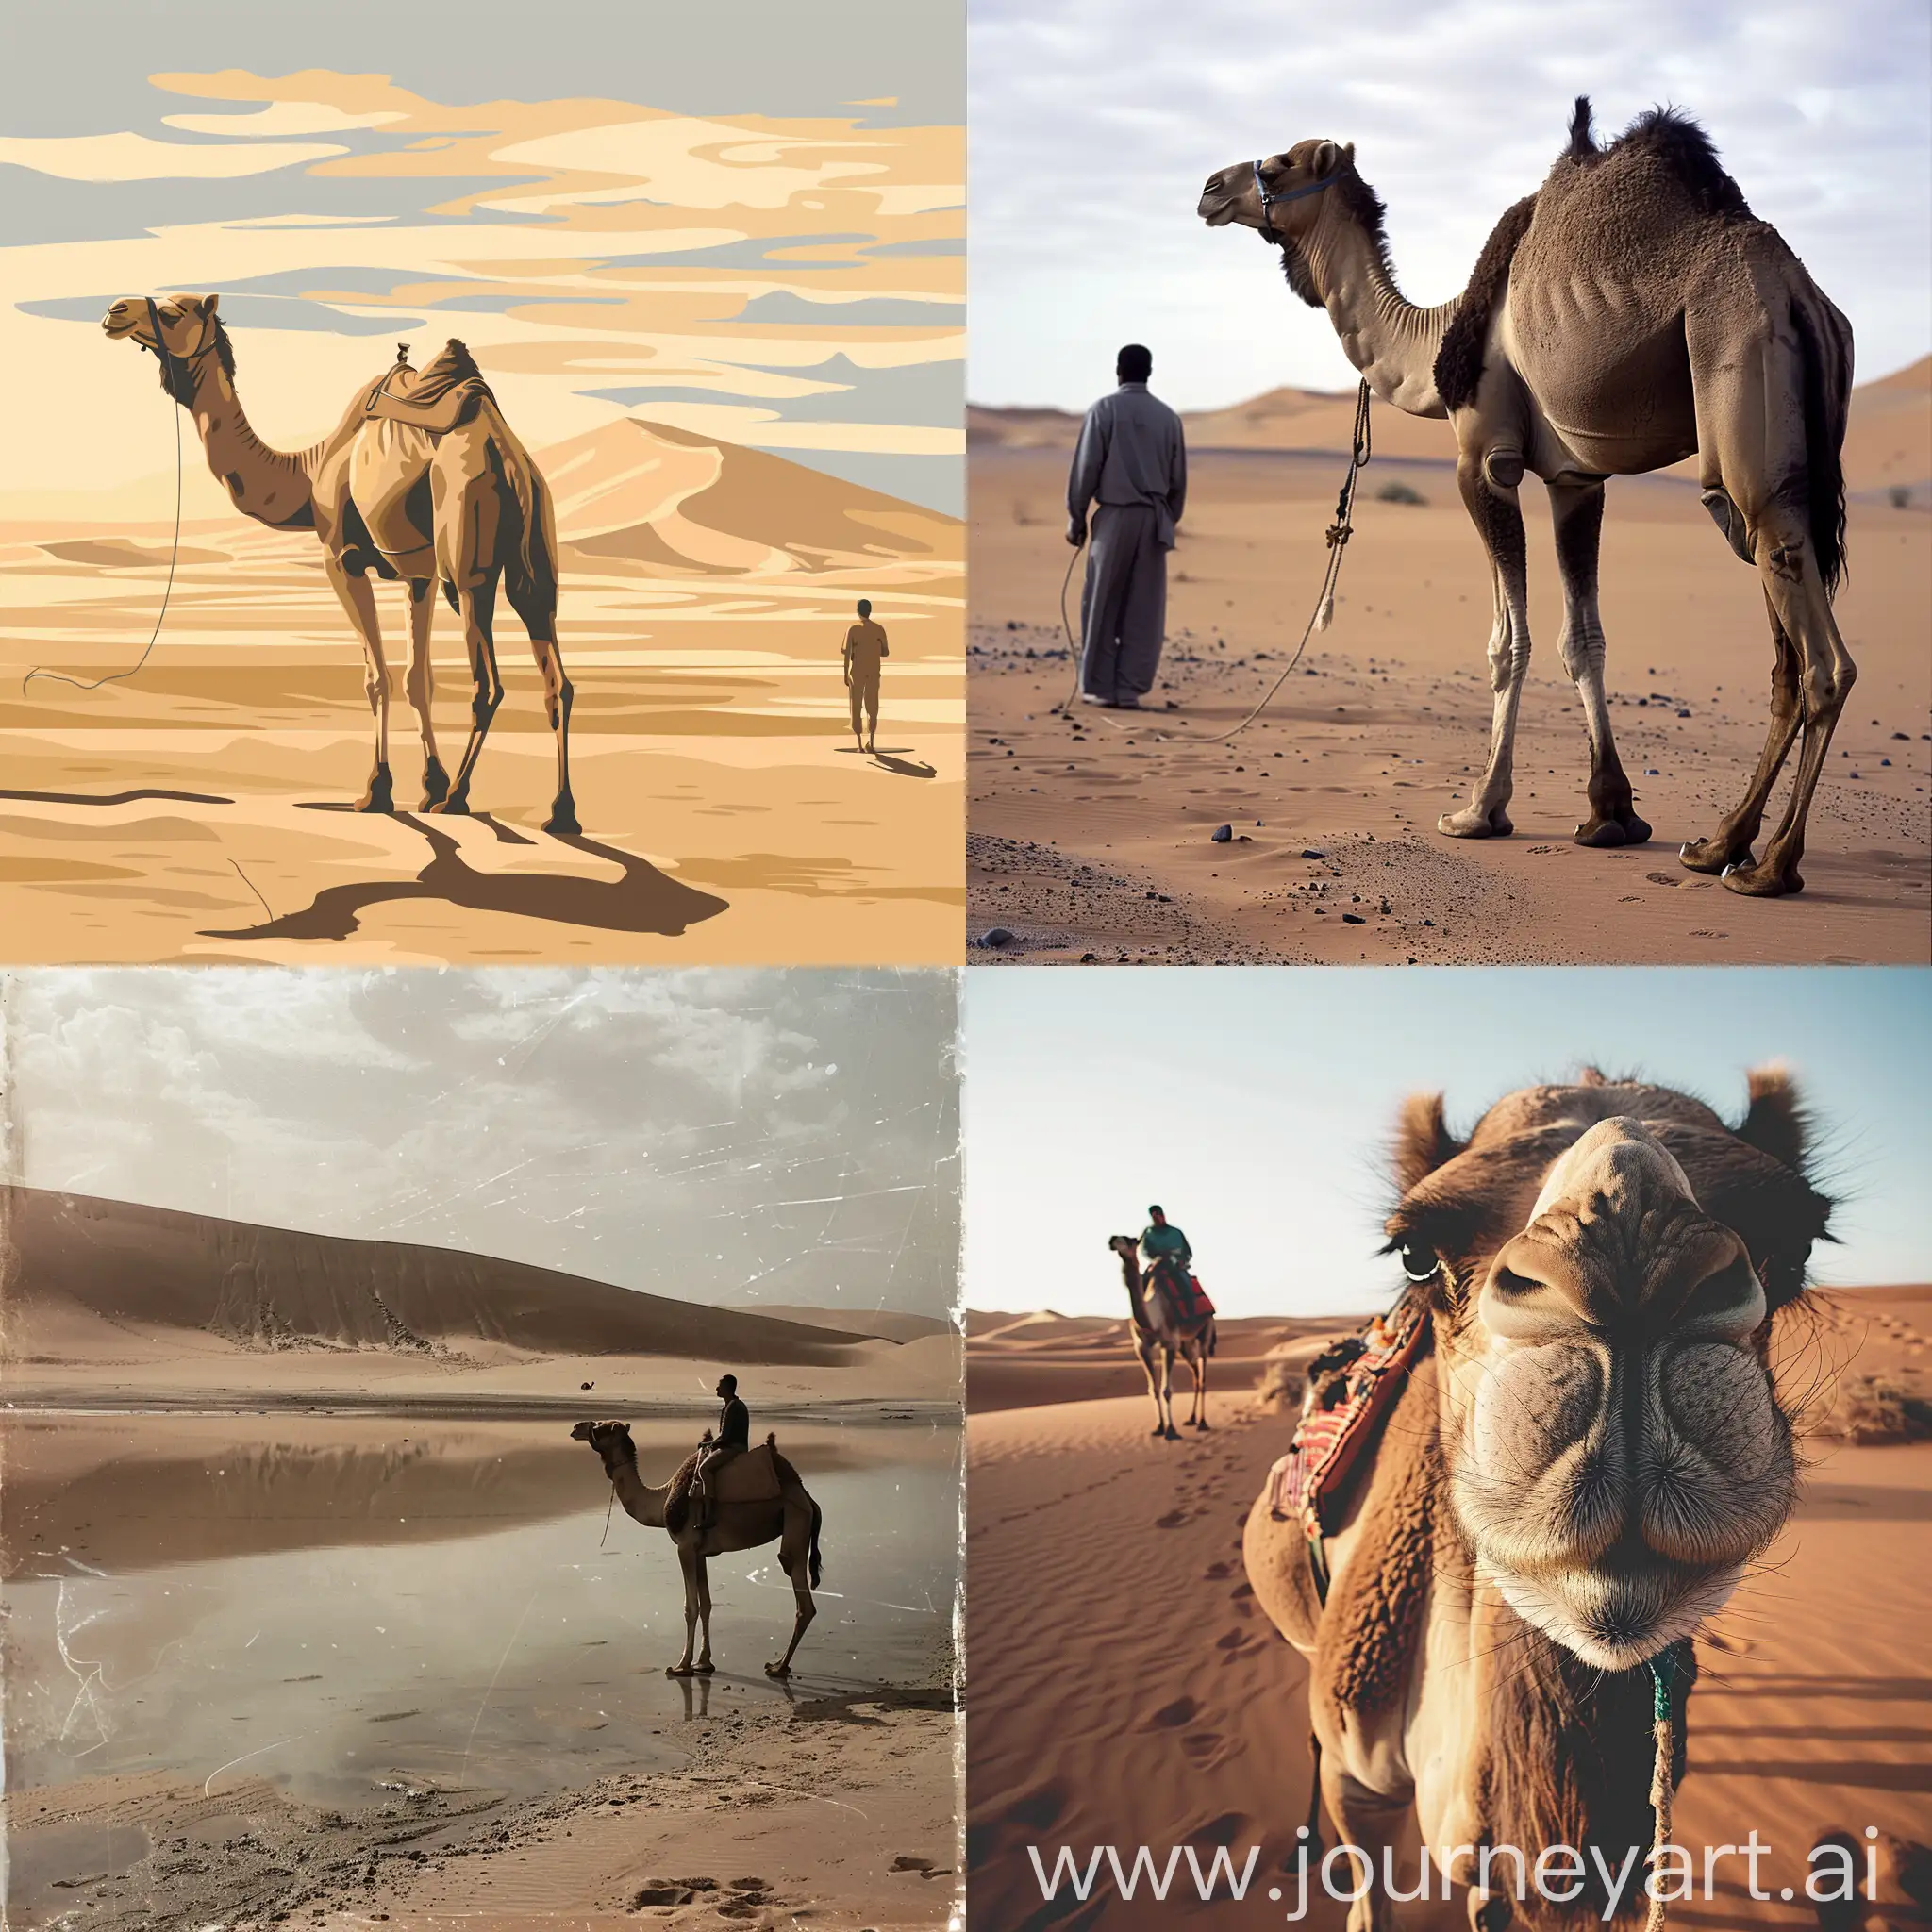 Man-and-Camel-Searching-for-Water-in-the-Desert